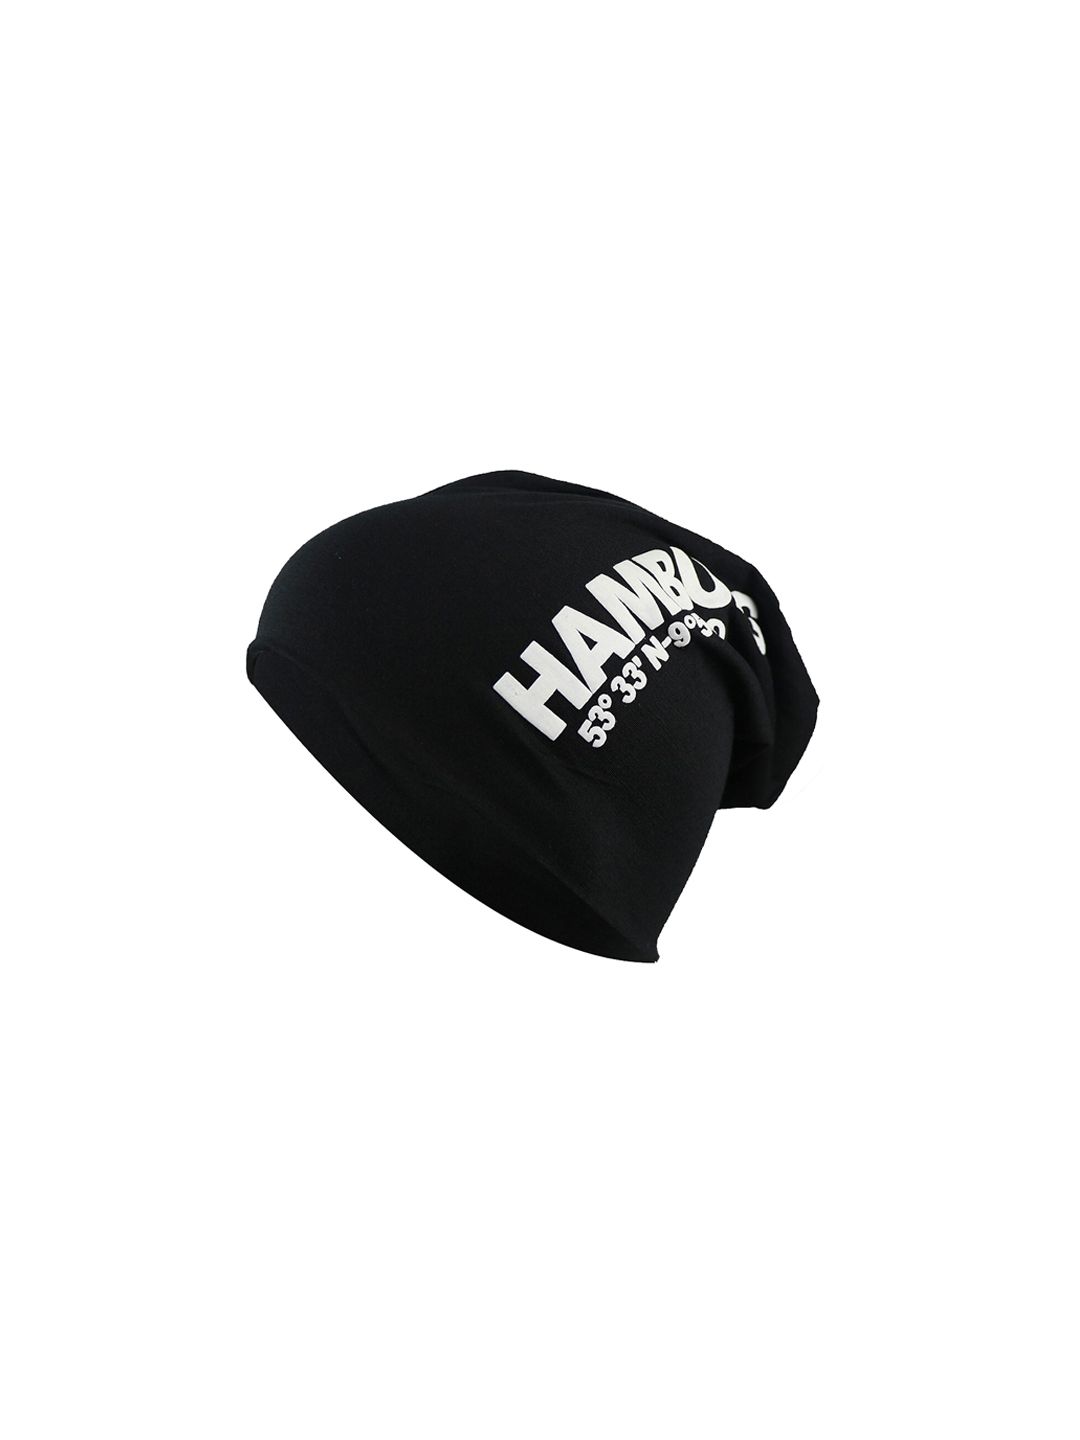 iSWEVEN Unisex Black & White Printed Beanie Price in India